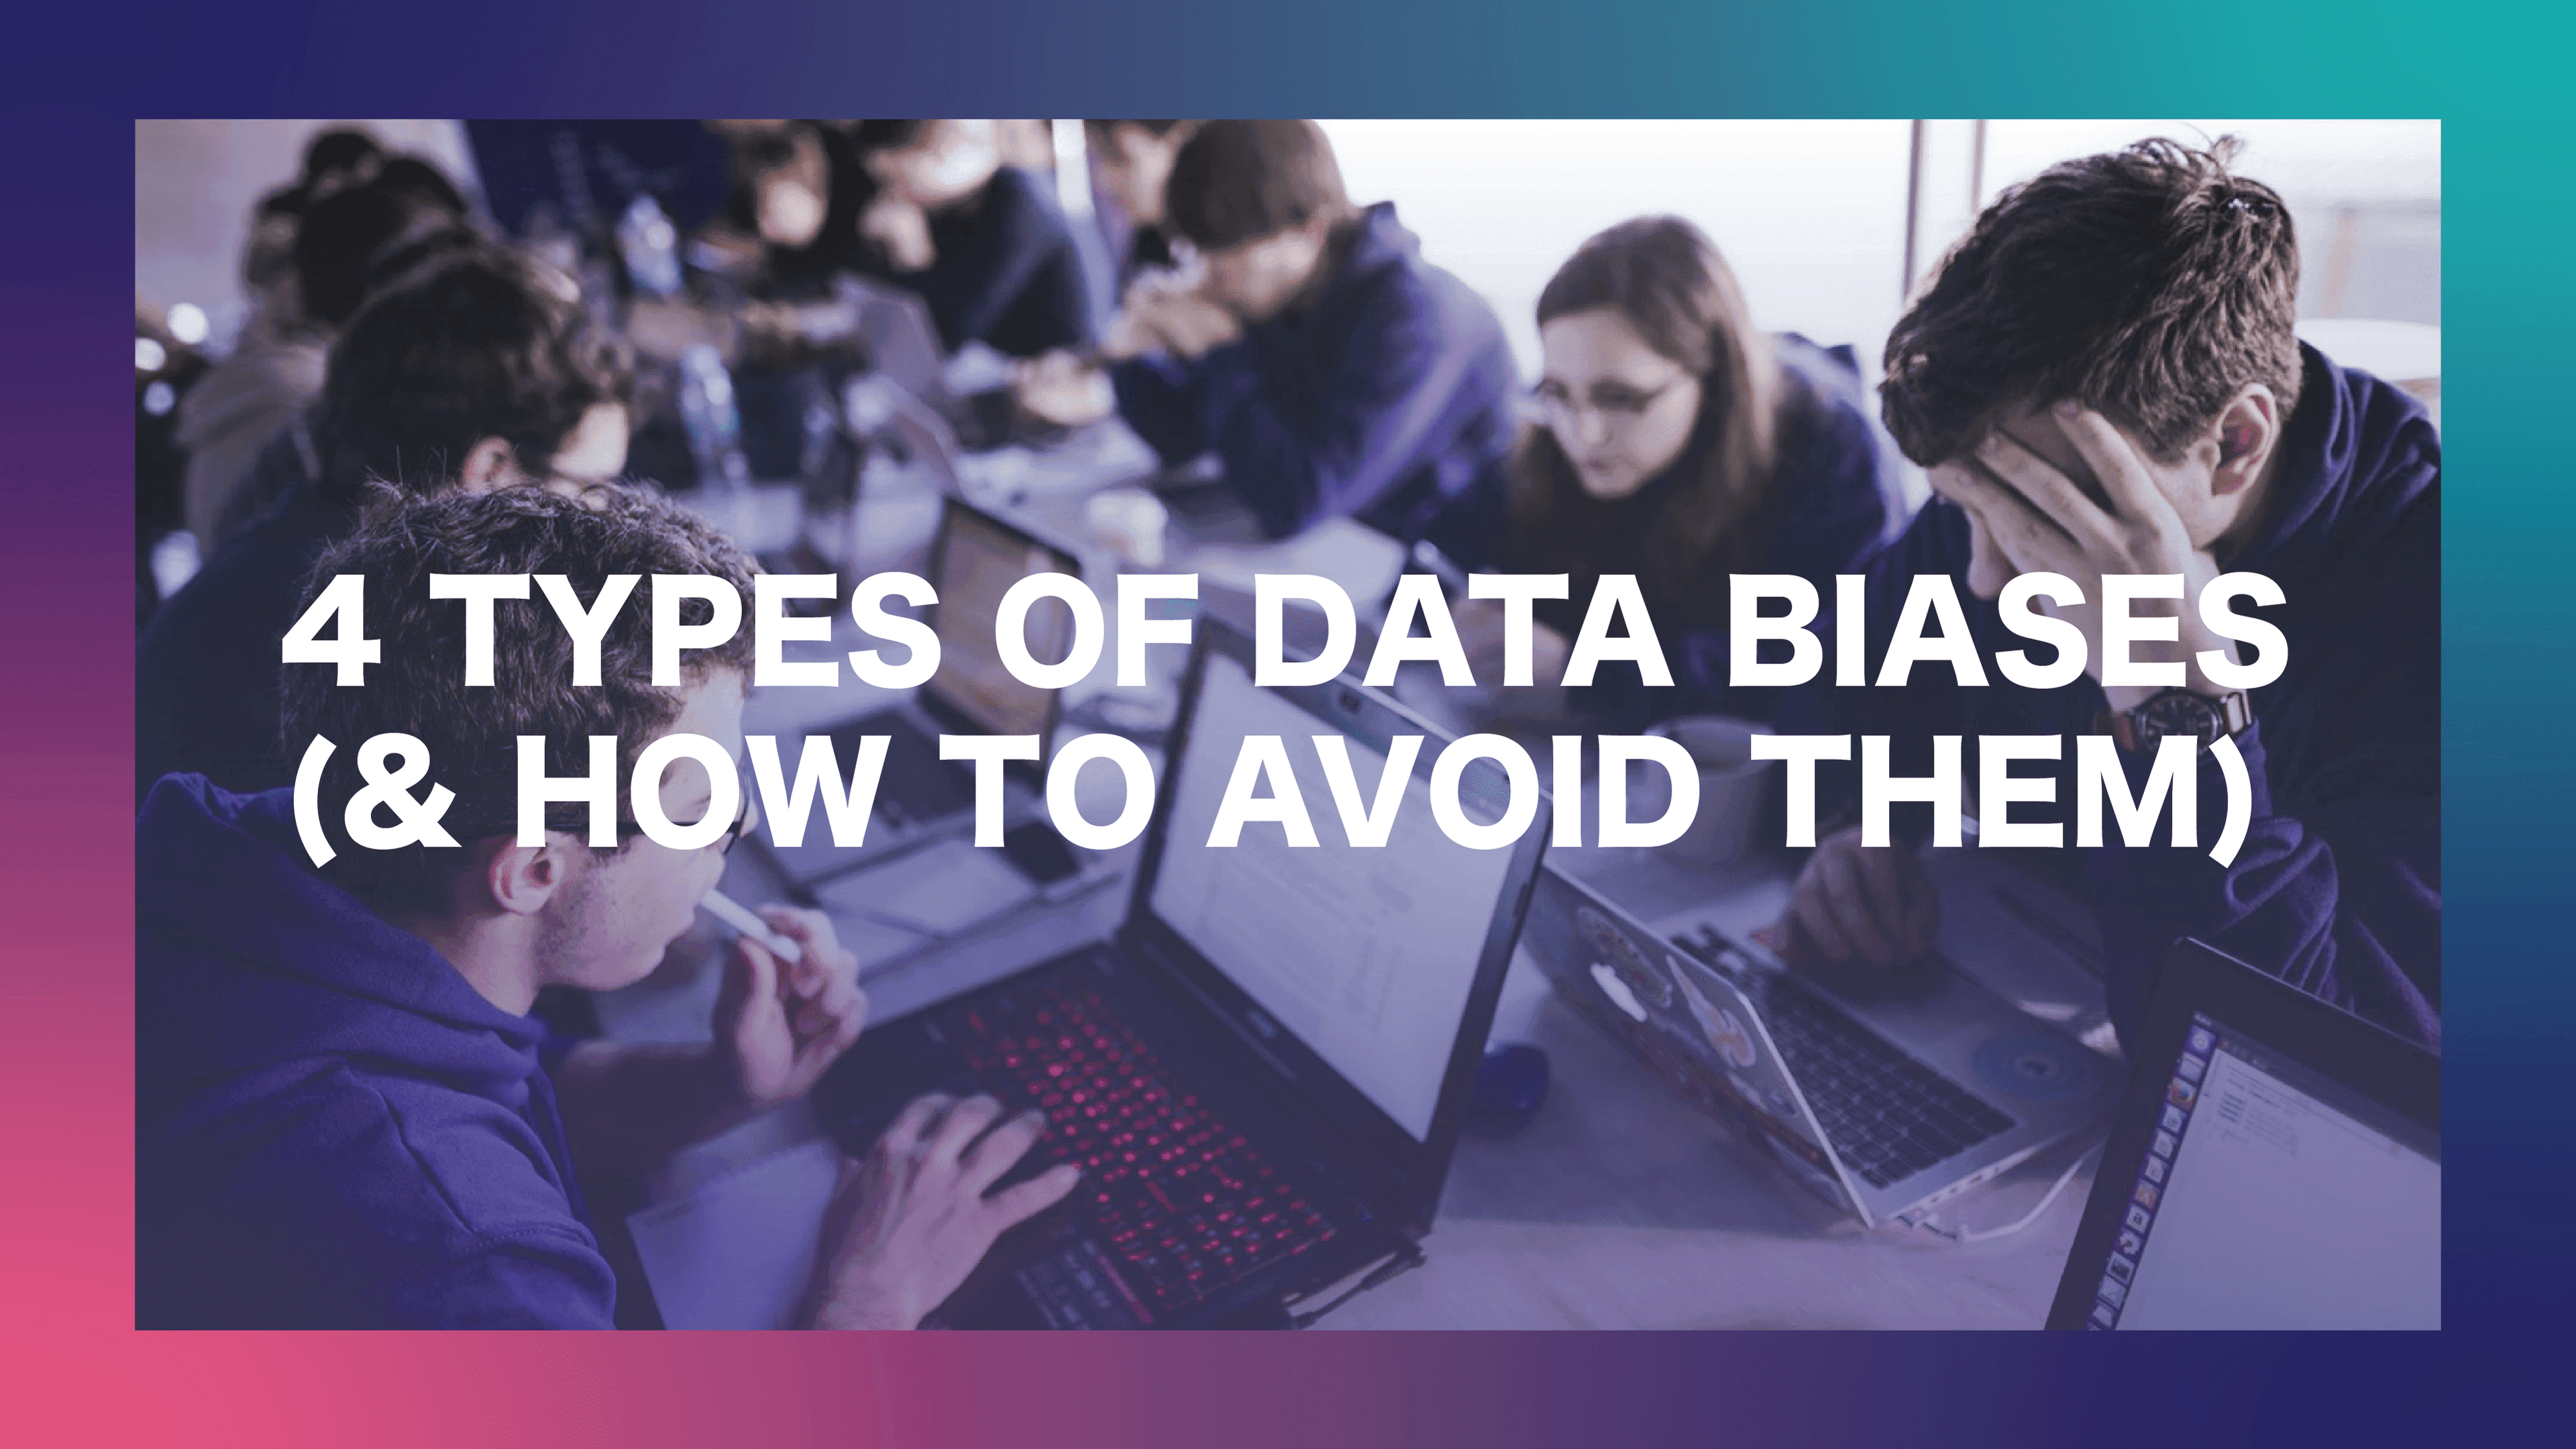 4 Types of Data Biases (And How to Avoid Them)